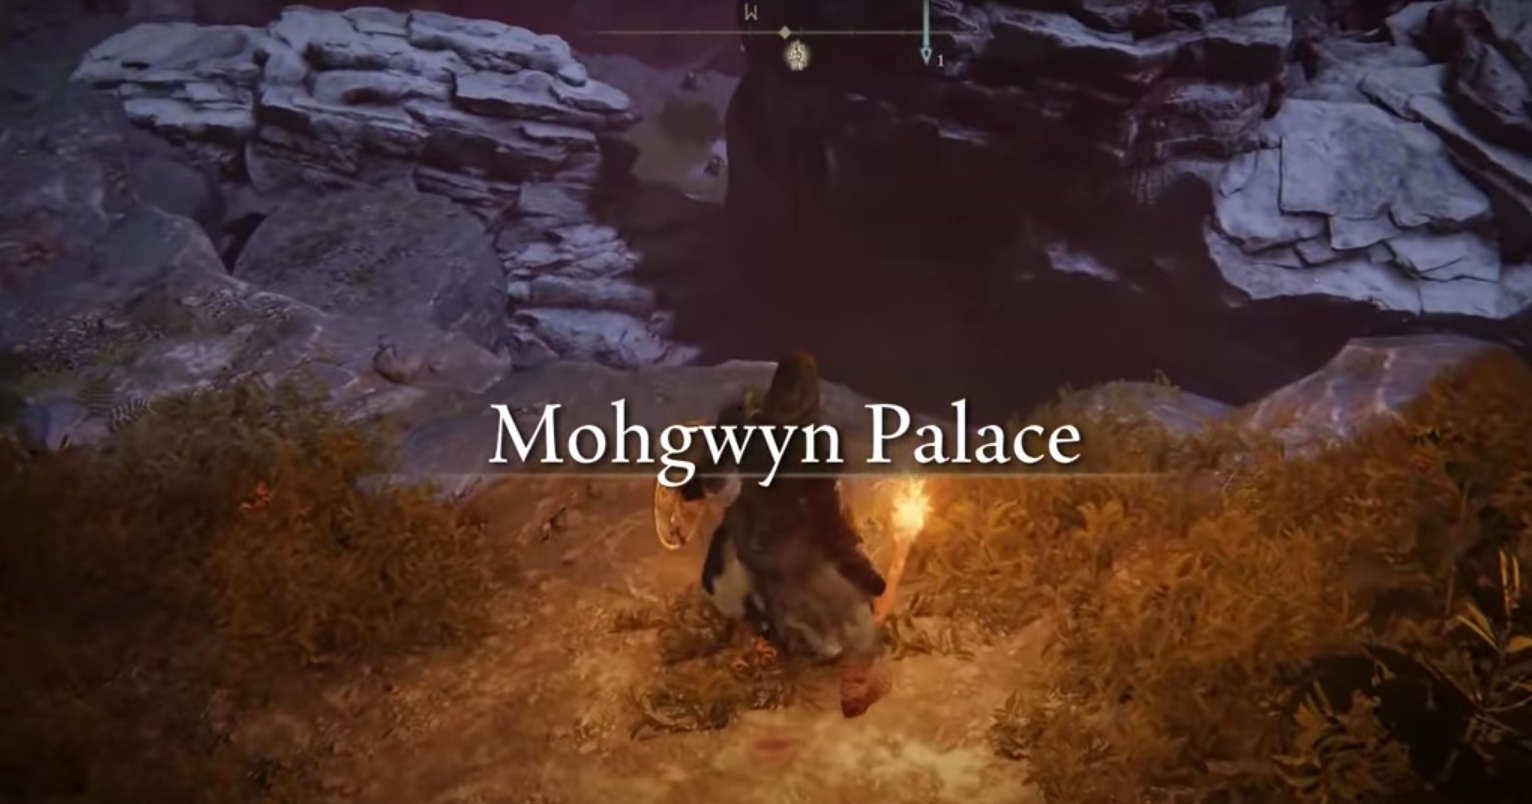 Mohgwyn Palace Arrived